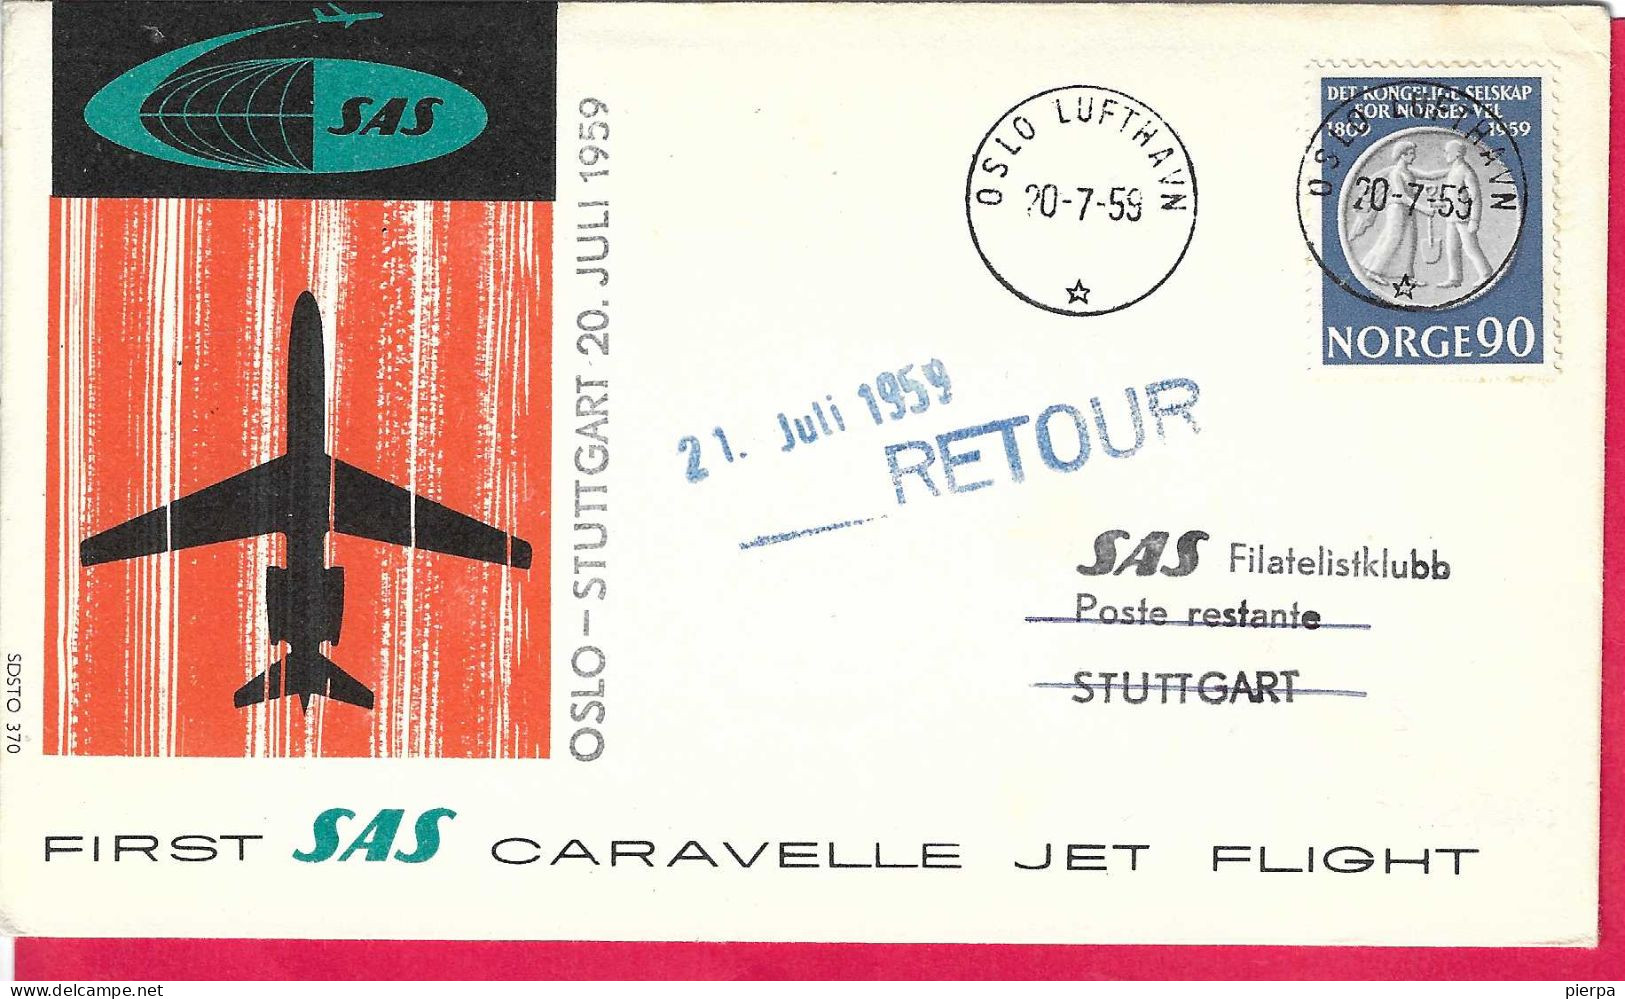 NORGE - FIRST SAS CARAVELLE FLIGHT - FROM OSLO TO STUTTGART *20.7.59* ON OFFICIAL COVER - Lettres & Documents